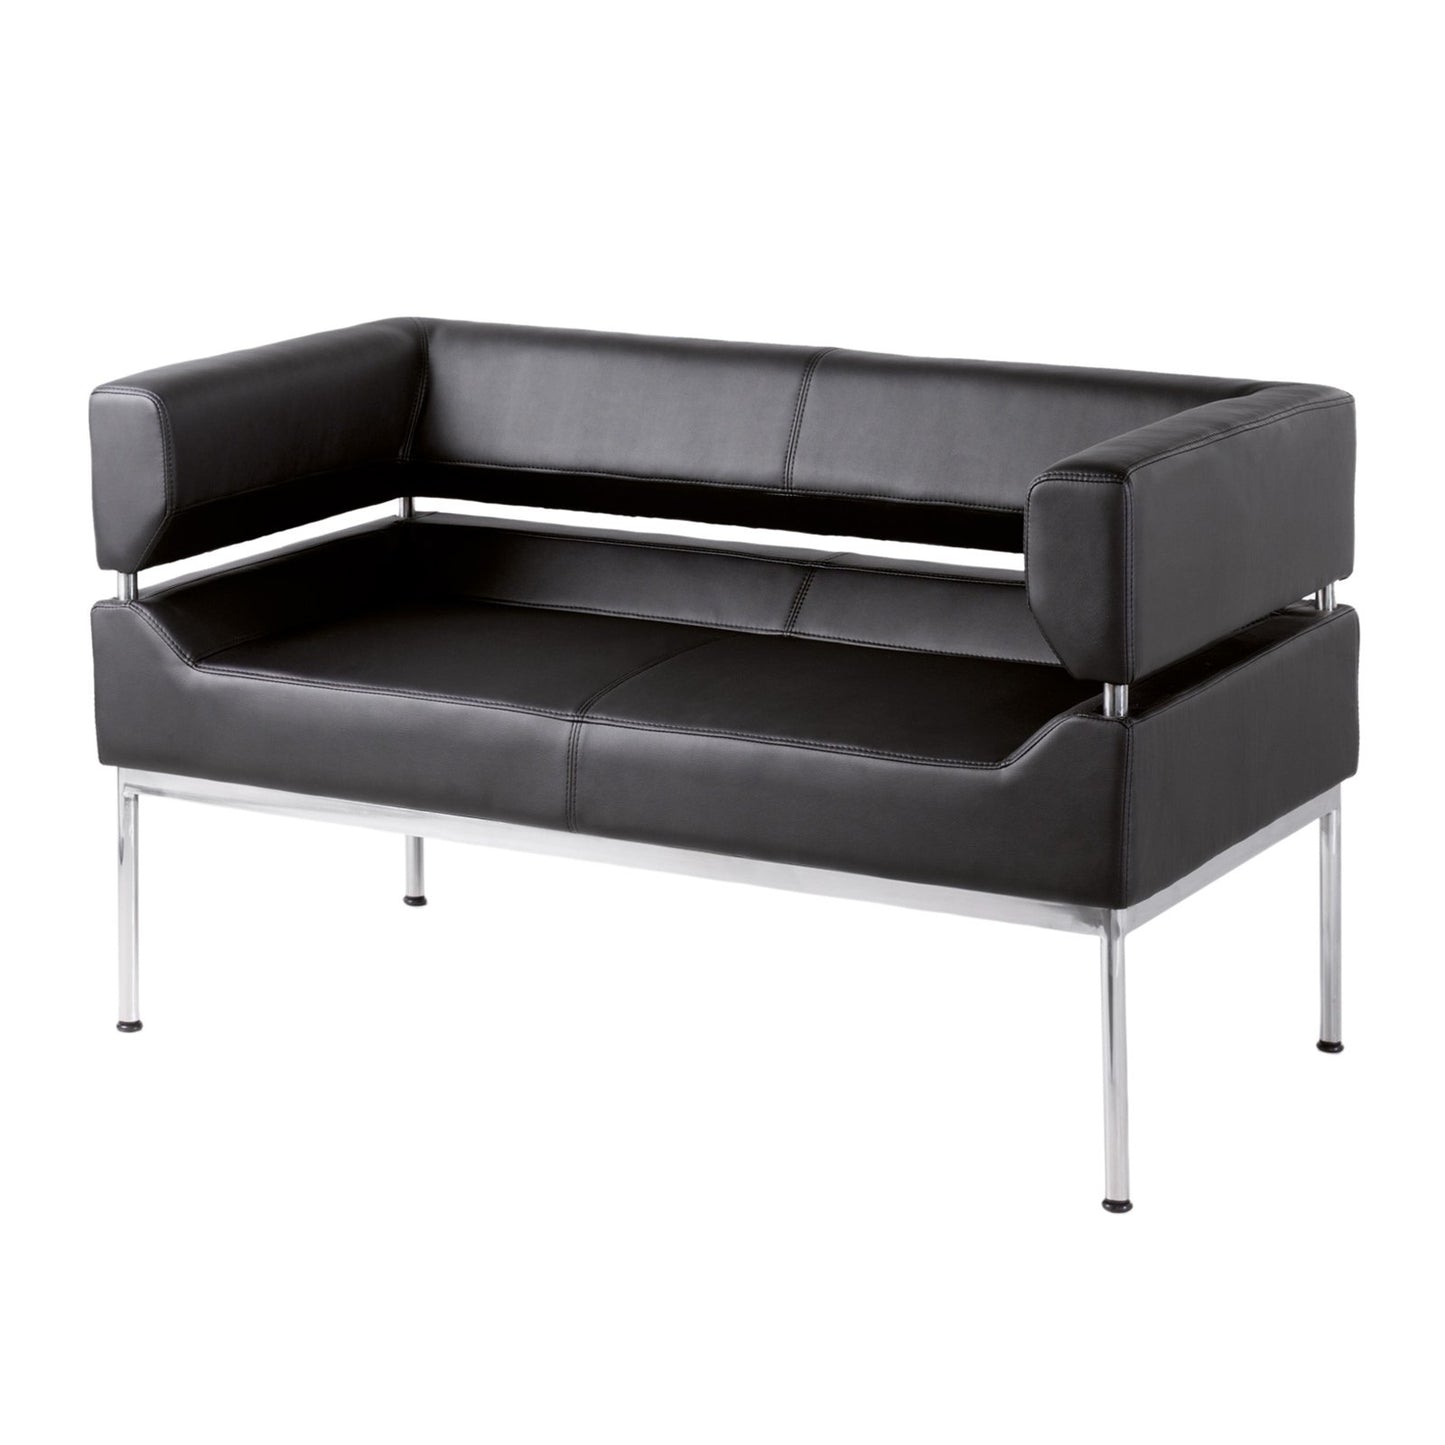 Benotto leather reception seating